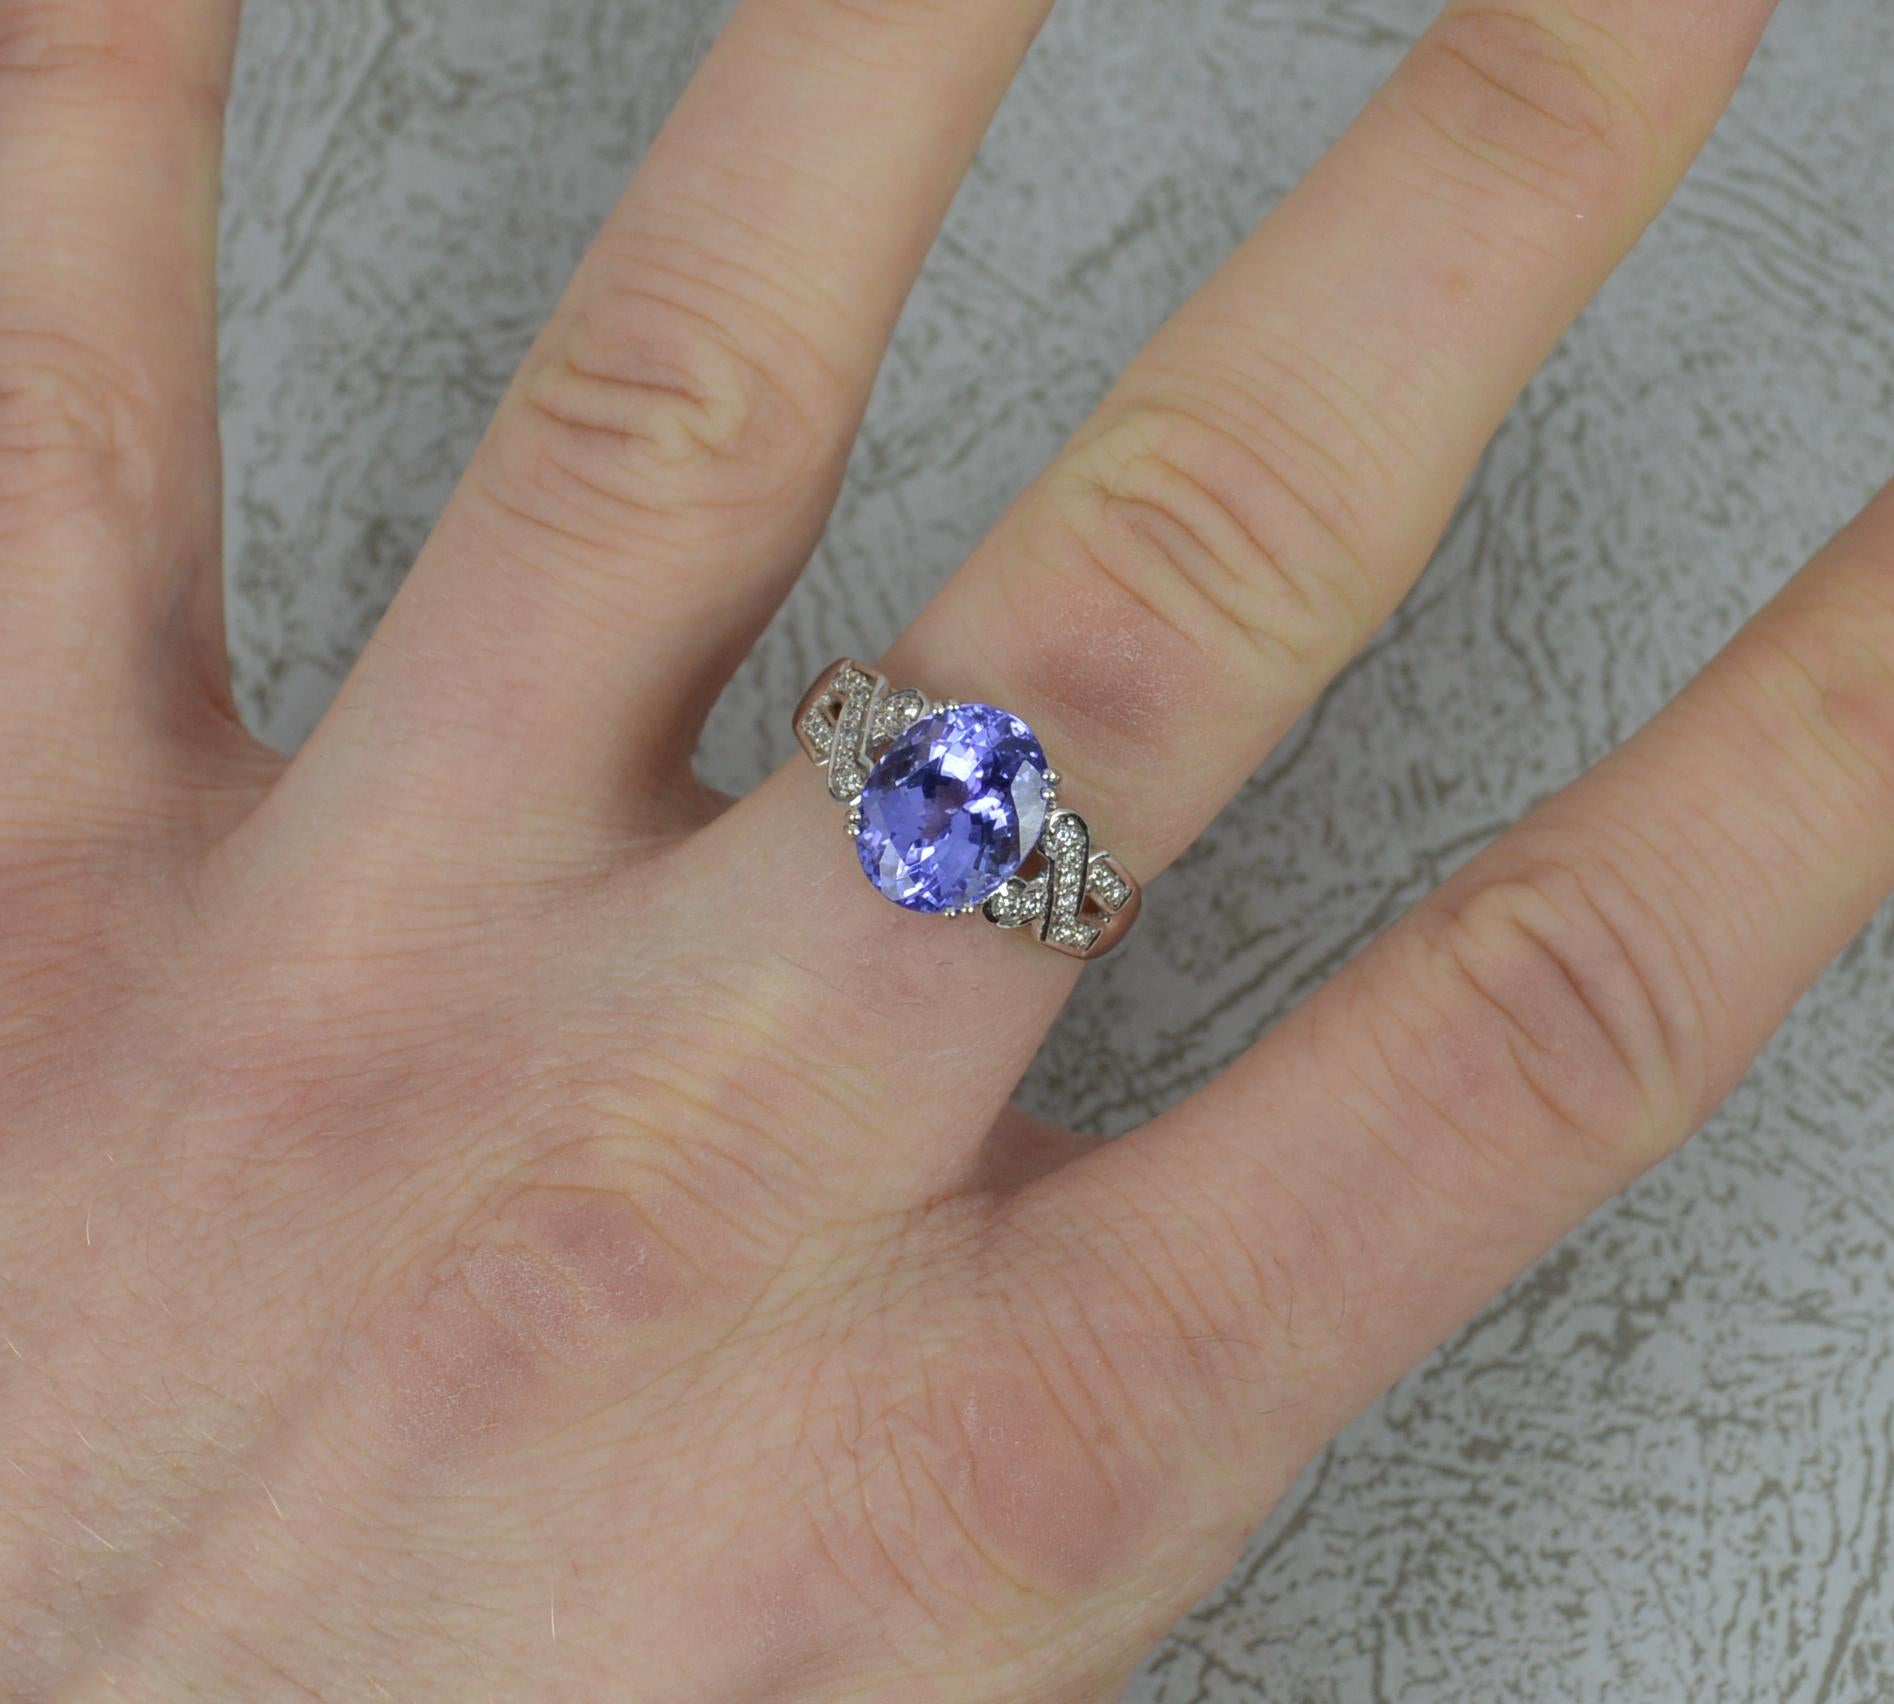 A superb ladies designer tanzanite and diamond ring.
Solid 18 carat white gold example.
Designed with an oval tanzanite to centre in four double claw setting. 8.5mm x 10.7mm. Wonderful purple blue colour.
Twelve natural round cut diamonds to each